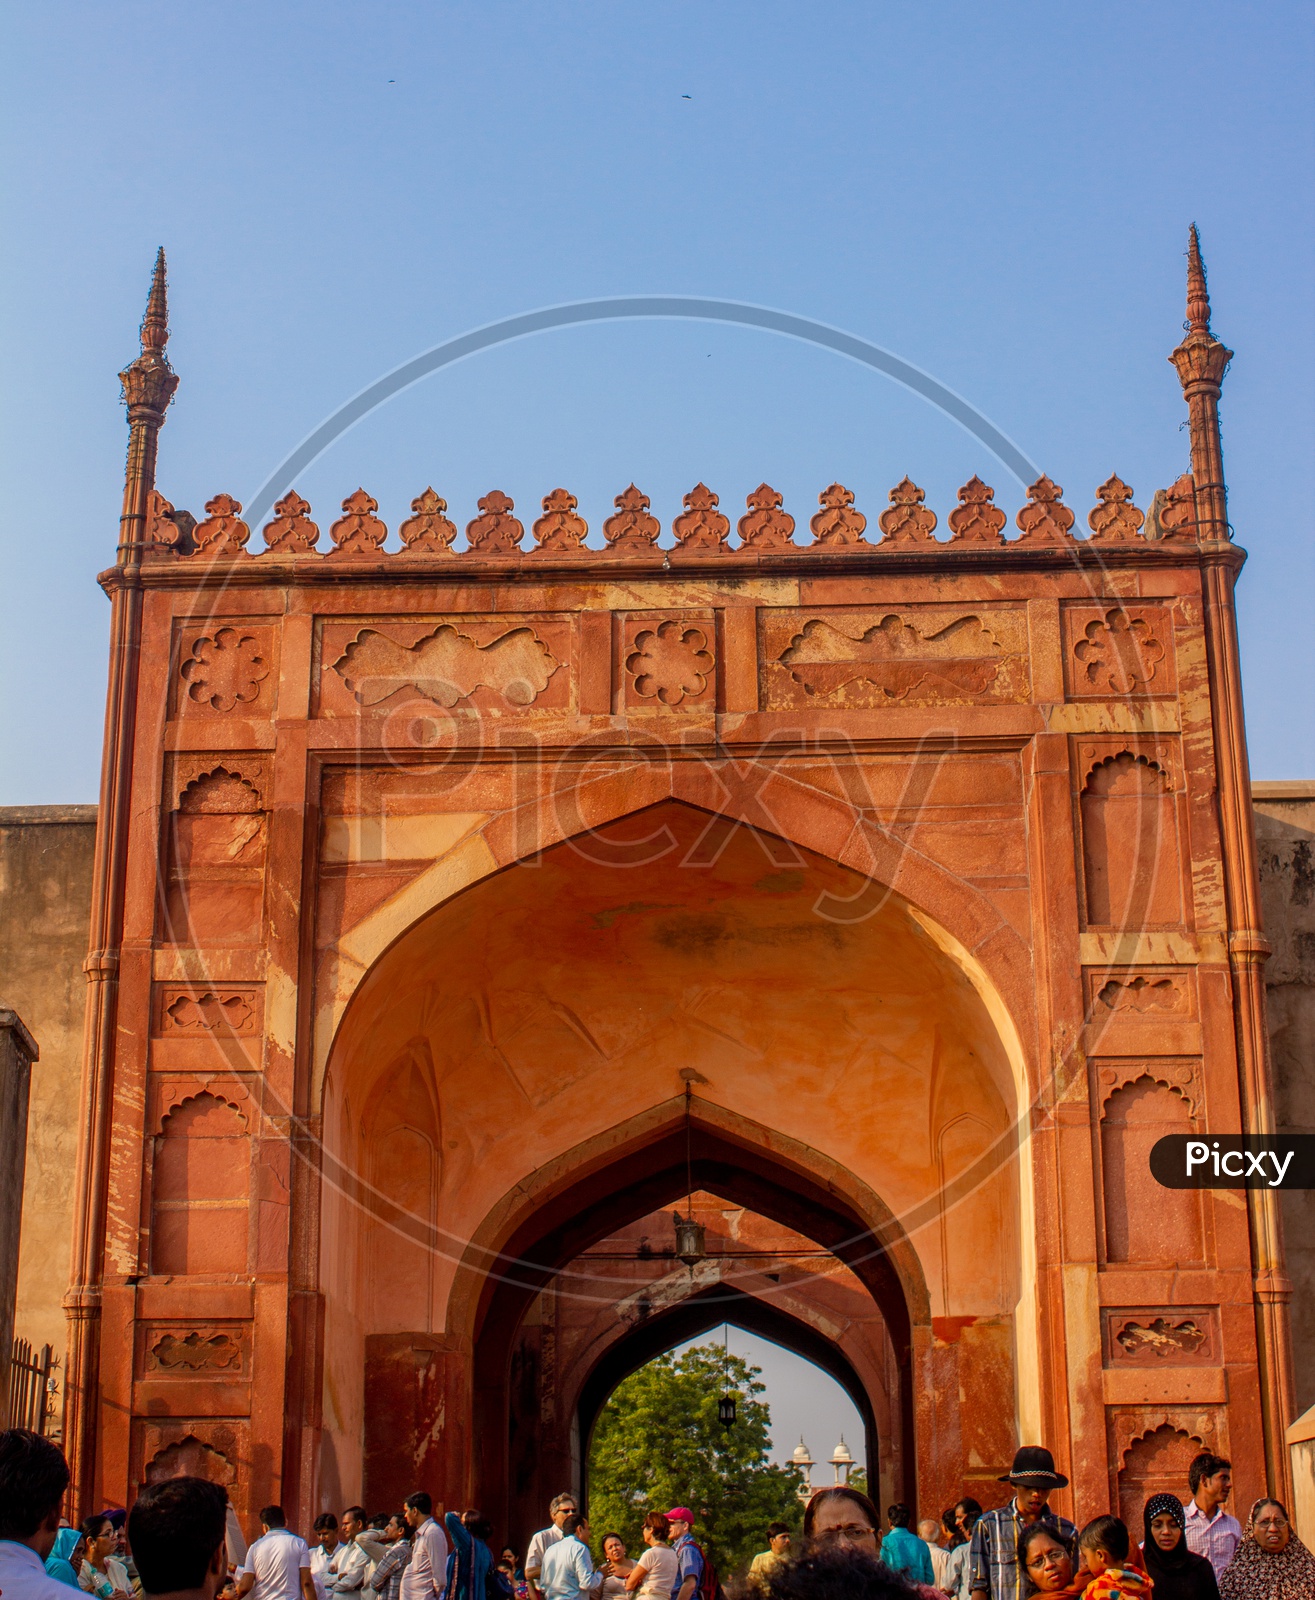 Entrance to the Tomb of Itimad-Ud-Daulah